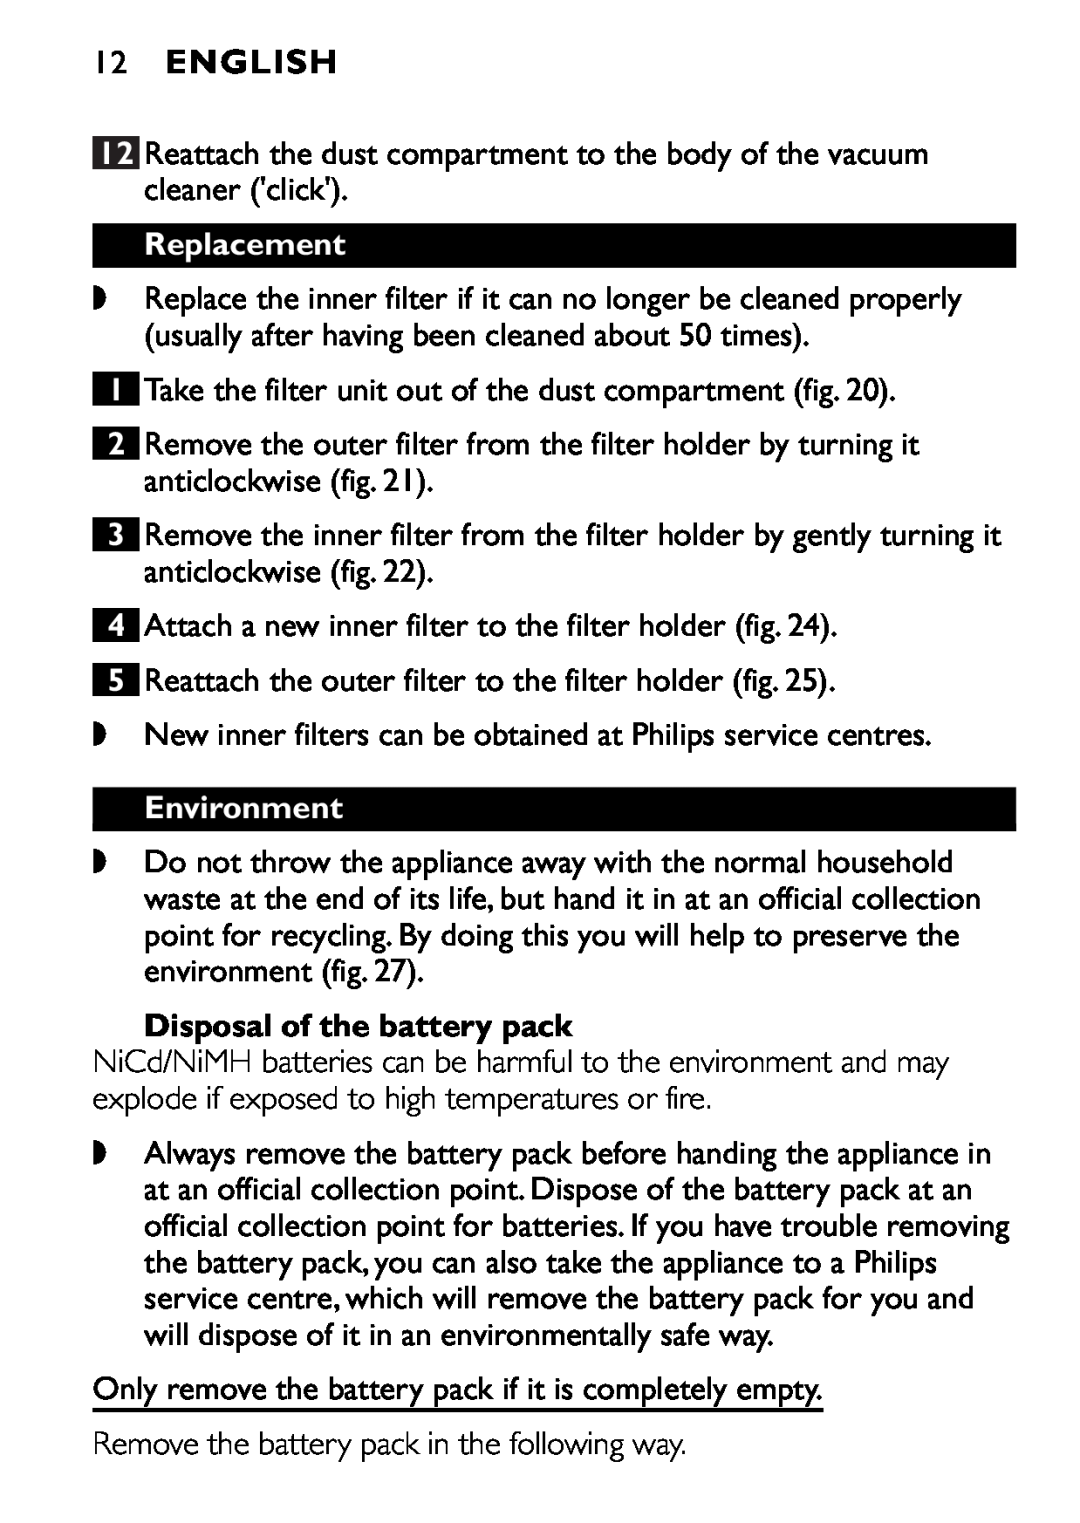 Philips FC6092, FC6090, FC6094 manual 12ENGLISH, Replacement, Environment, Disposal of the battery pack 